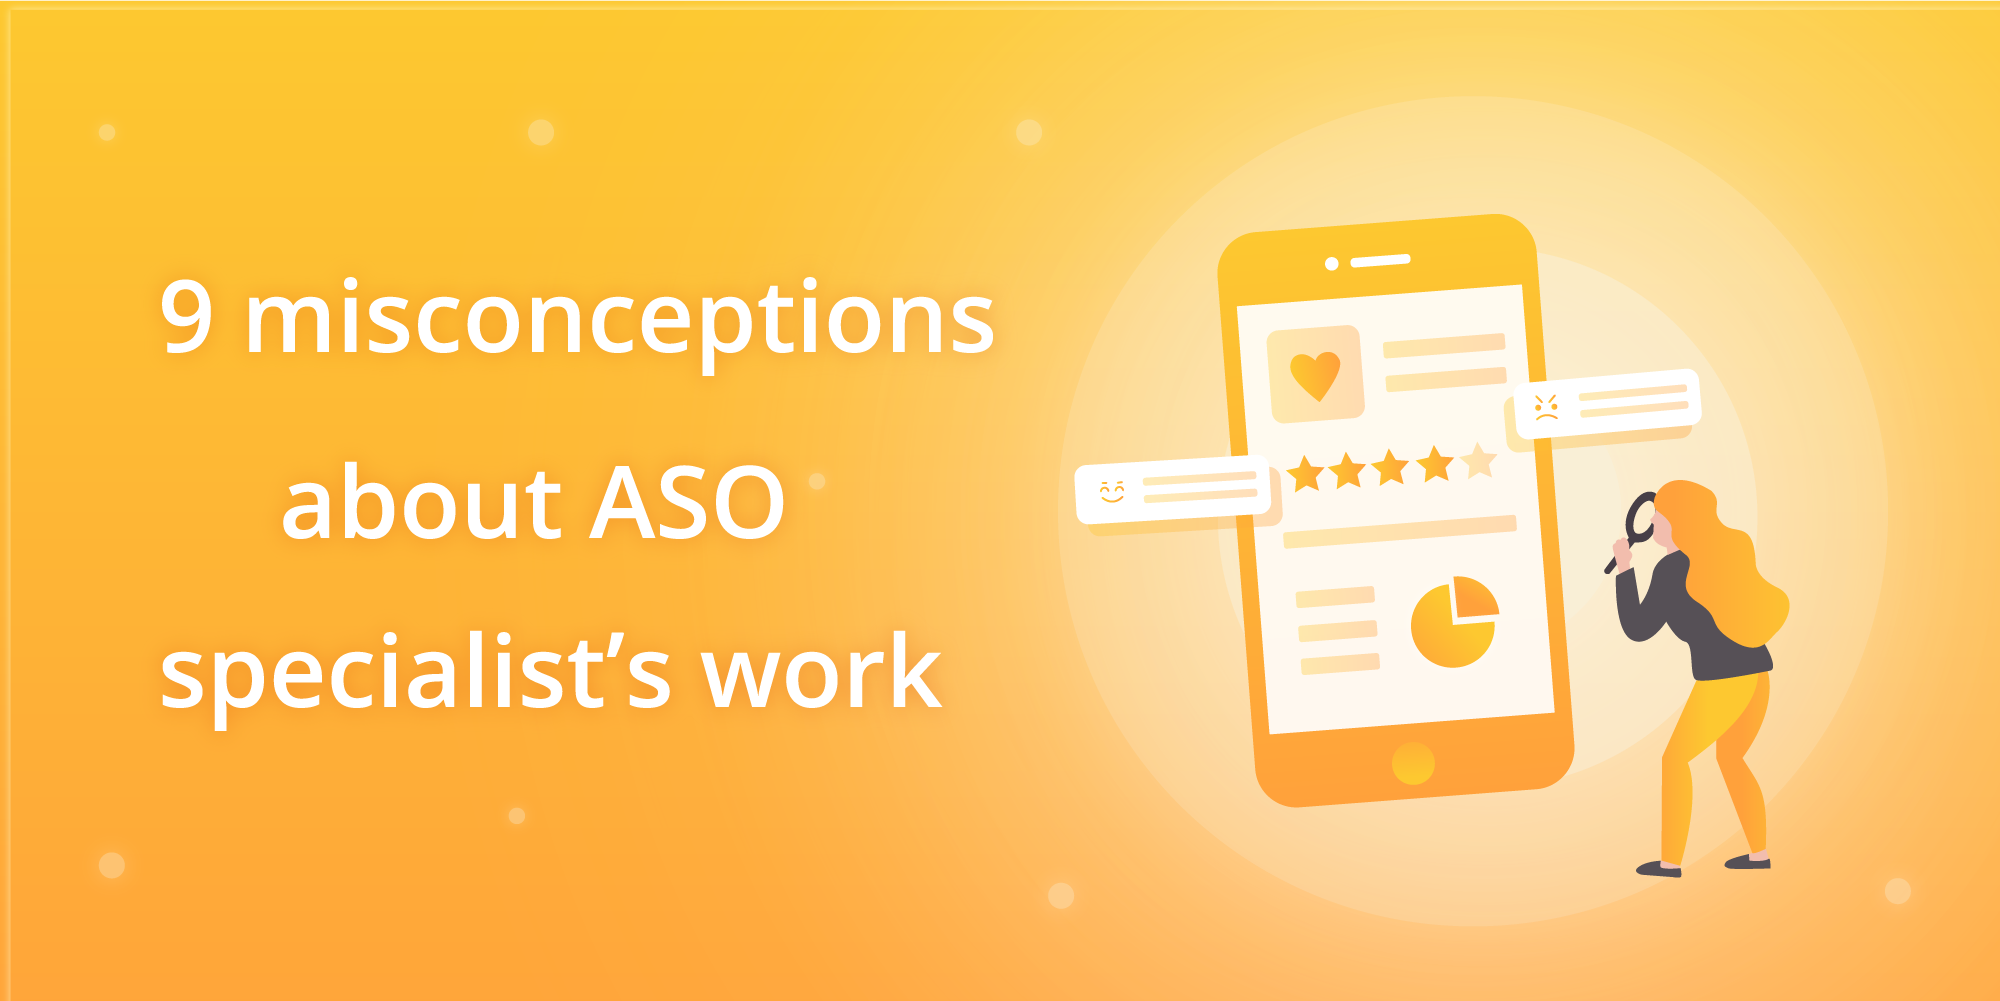 ASO tears: 9 misconceptions about ASO specialist’s work